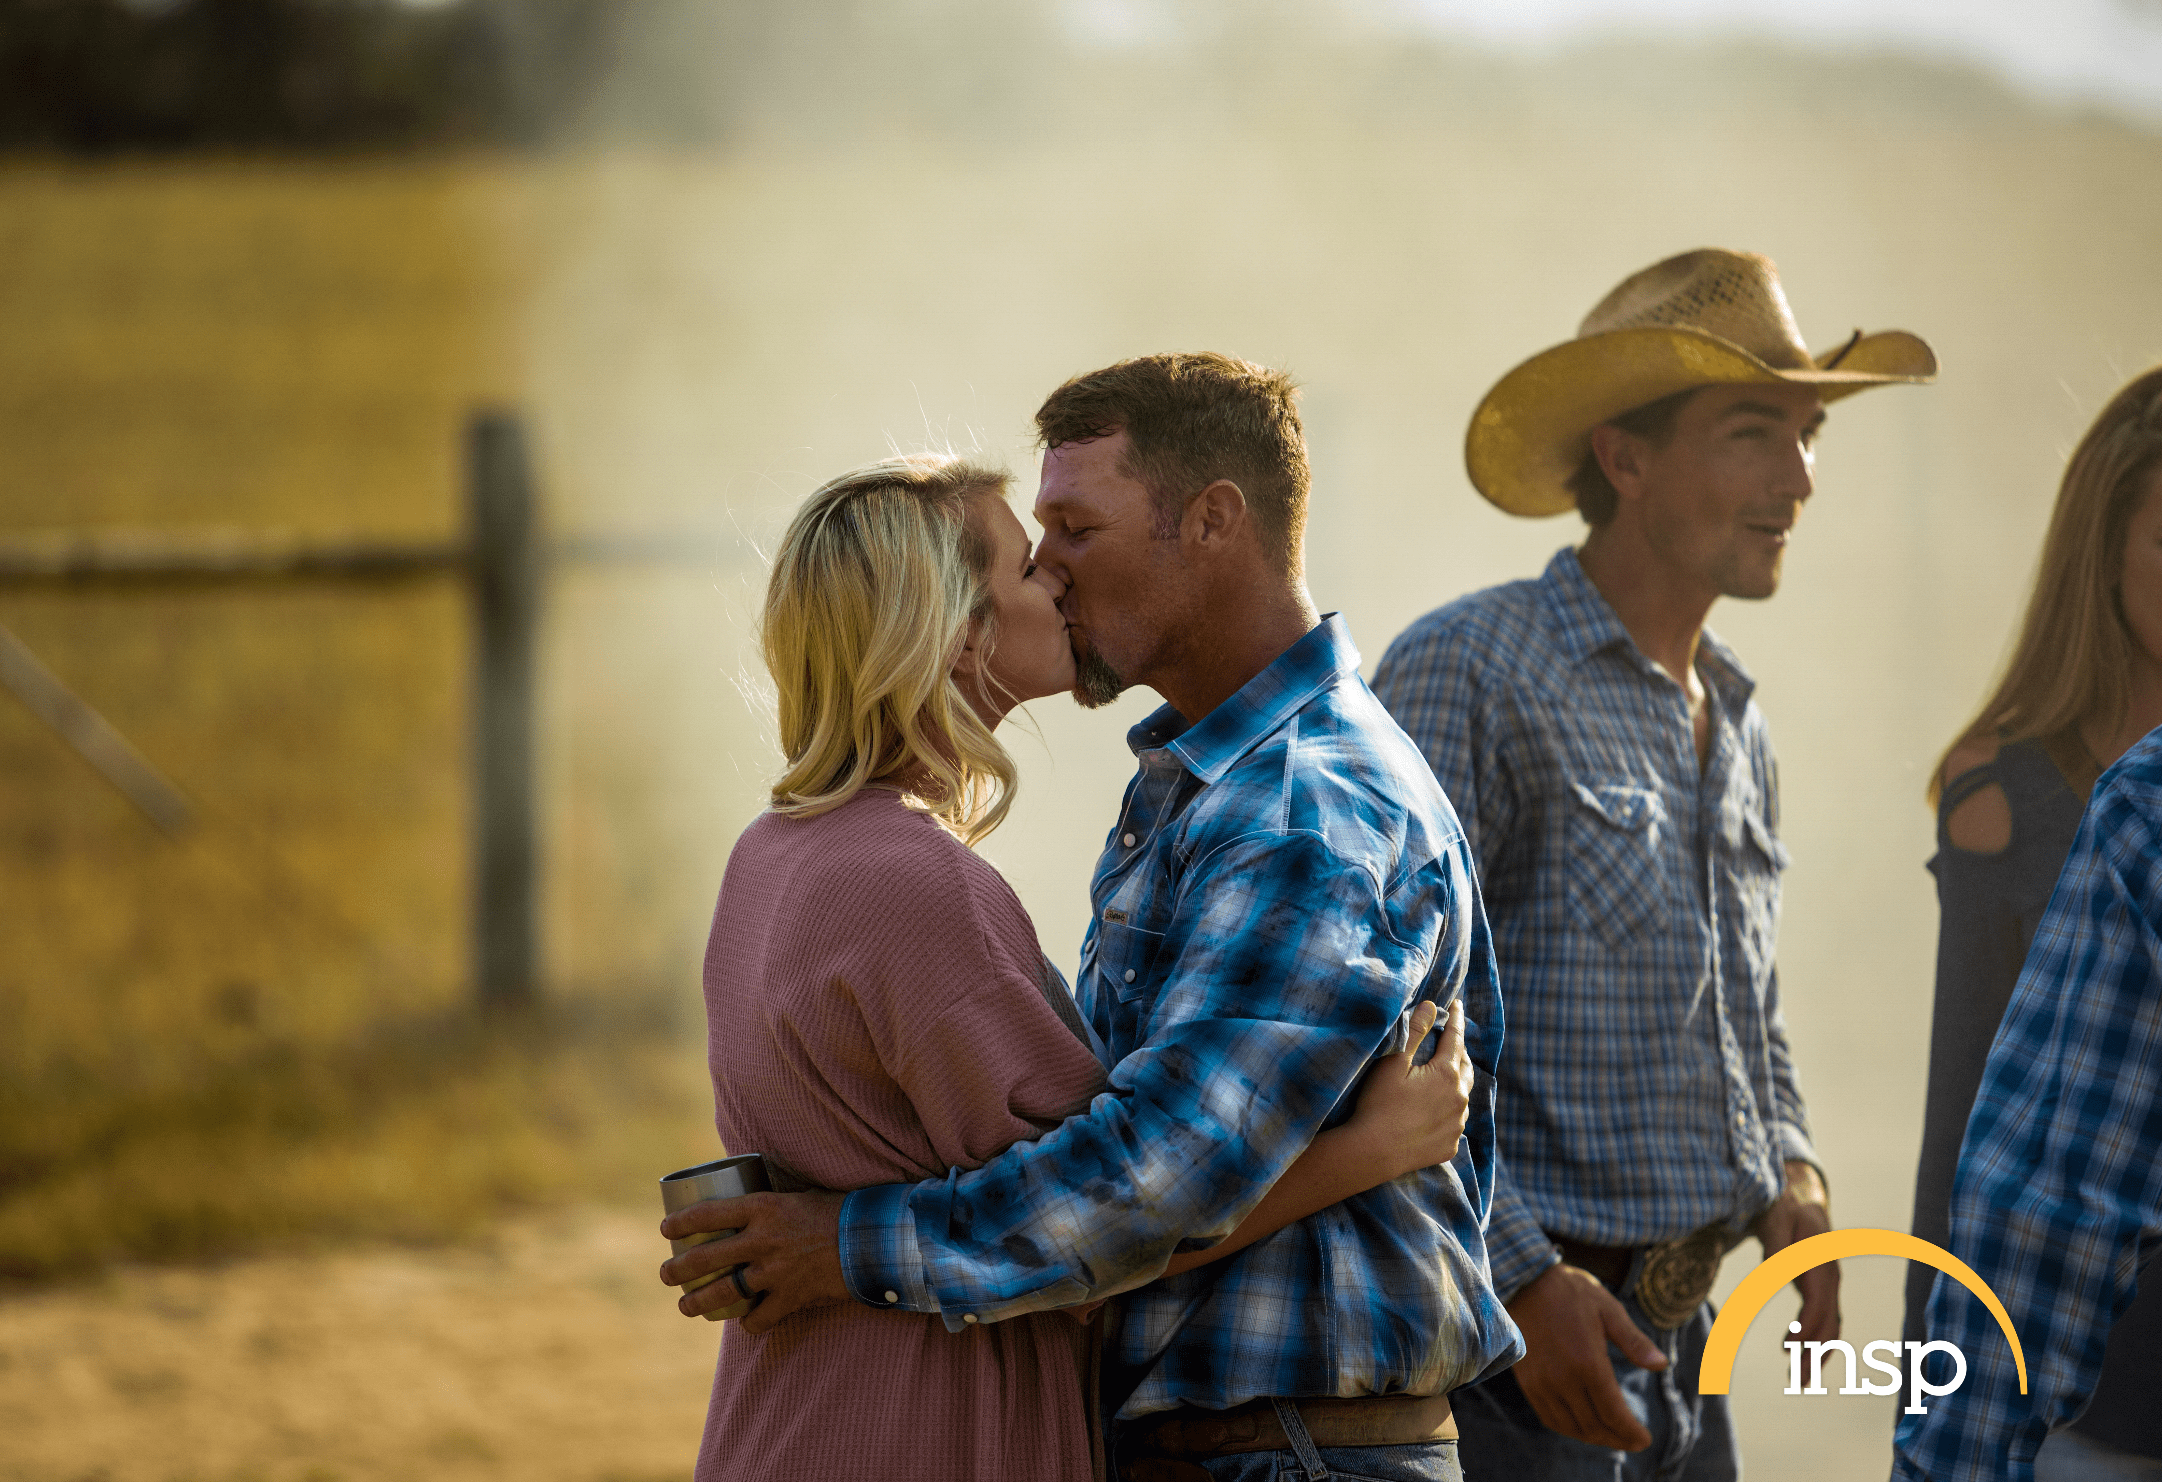 "The Cowboy Way" star Bubba Thompson and his wife Kaley kiss in a photograph. | Source: INSP